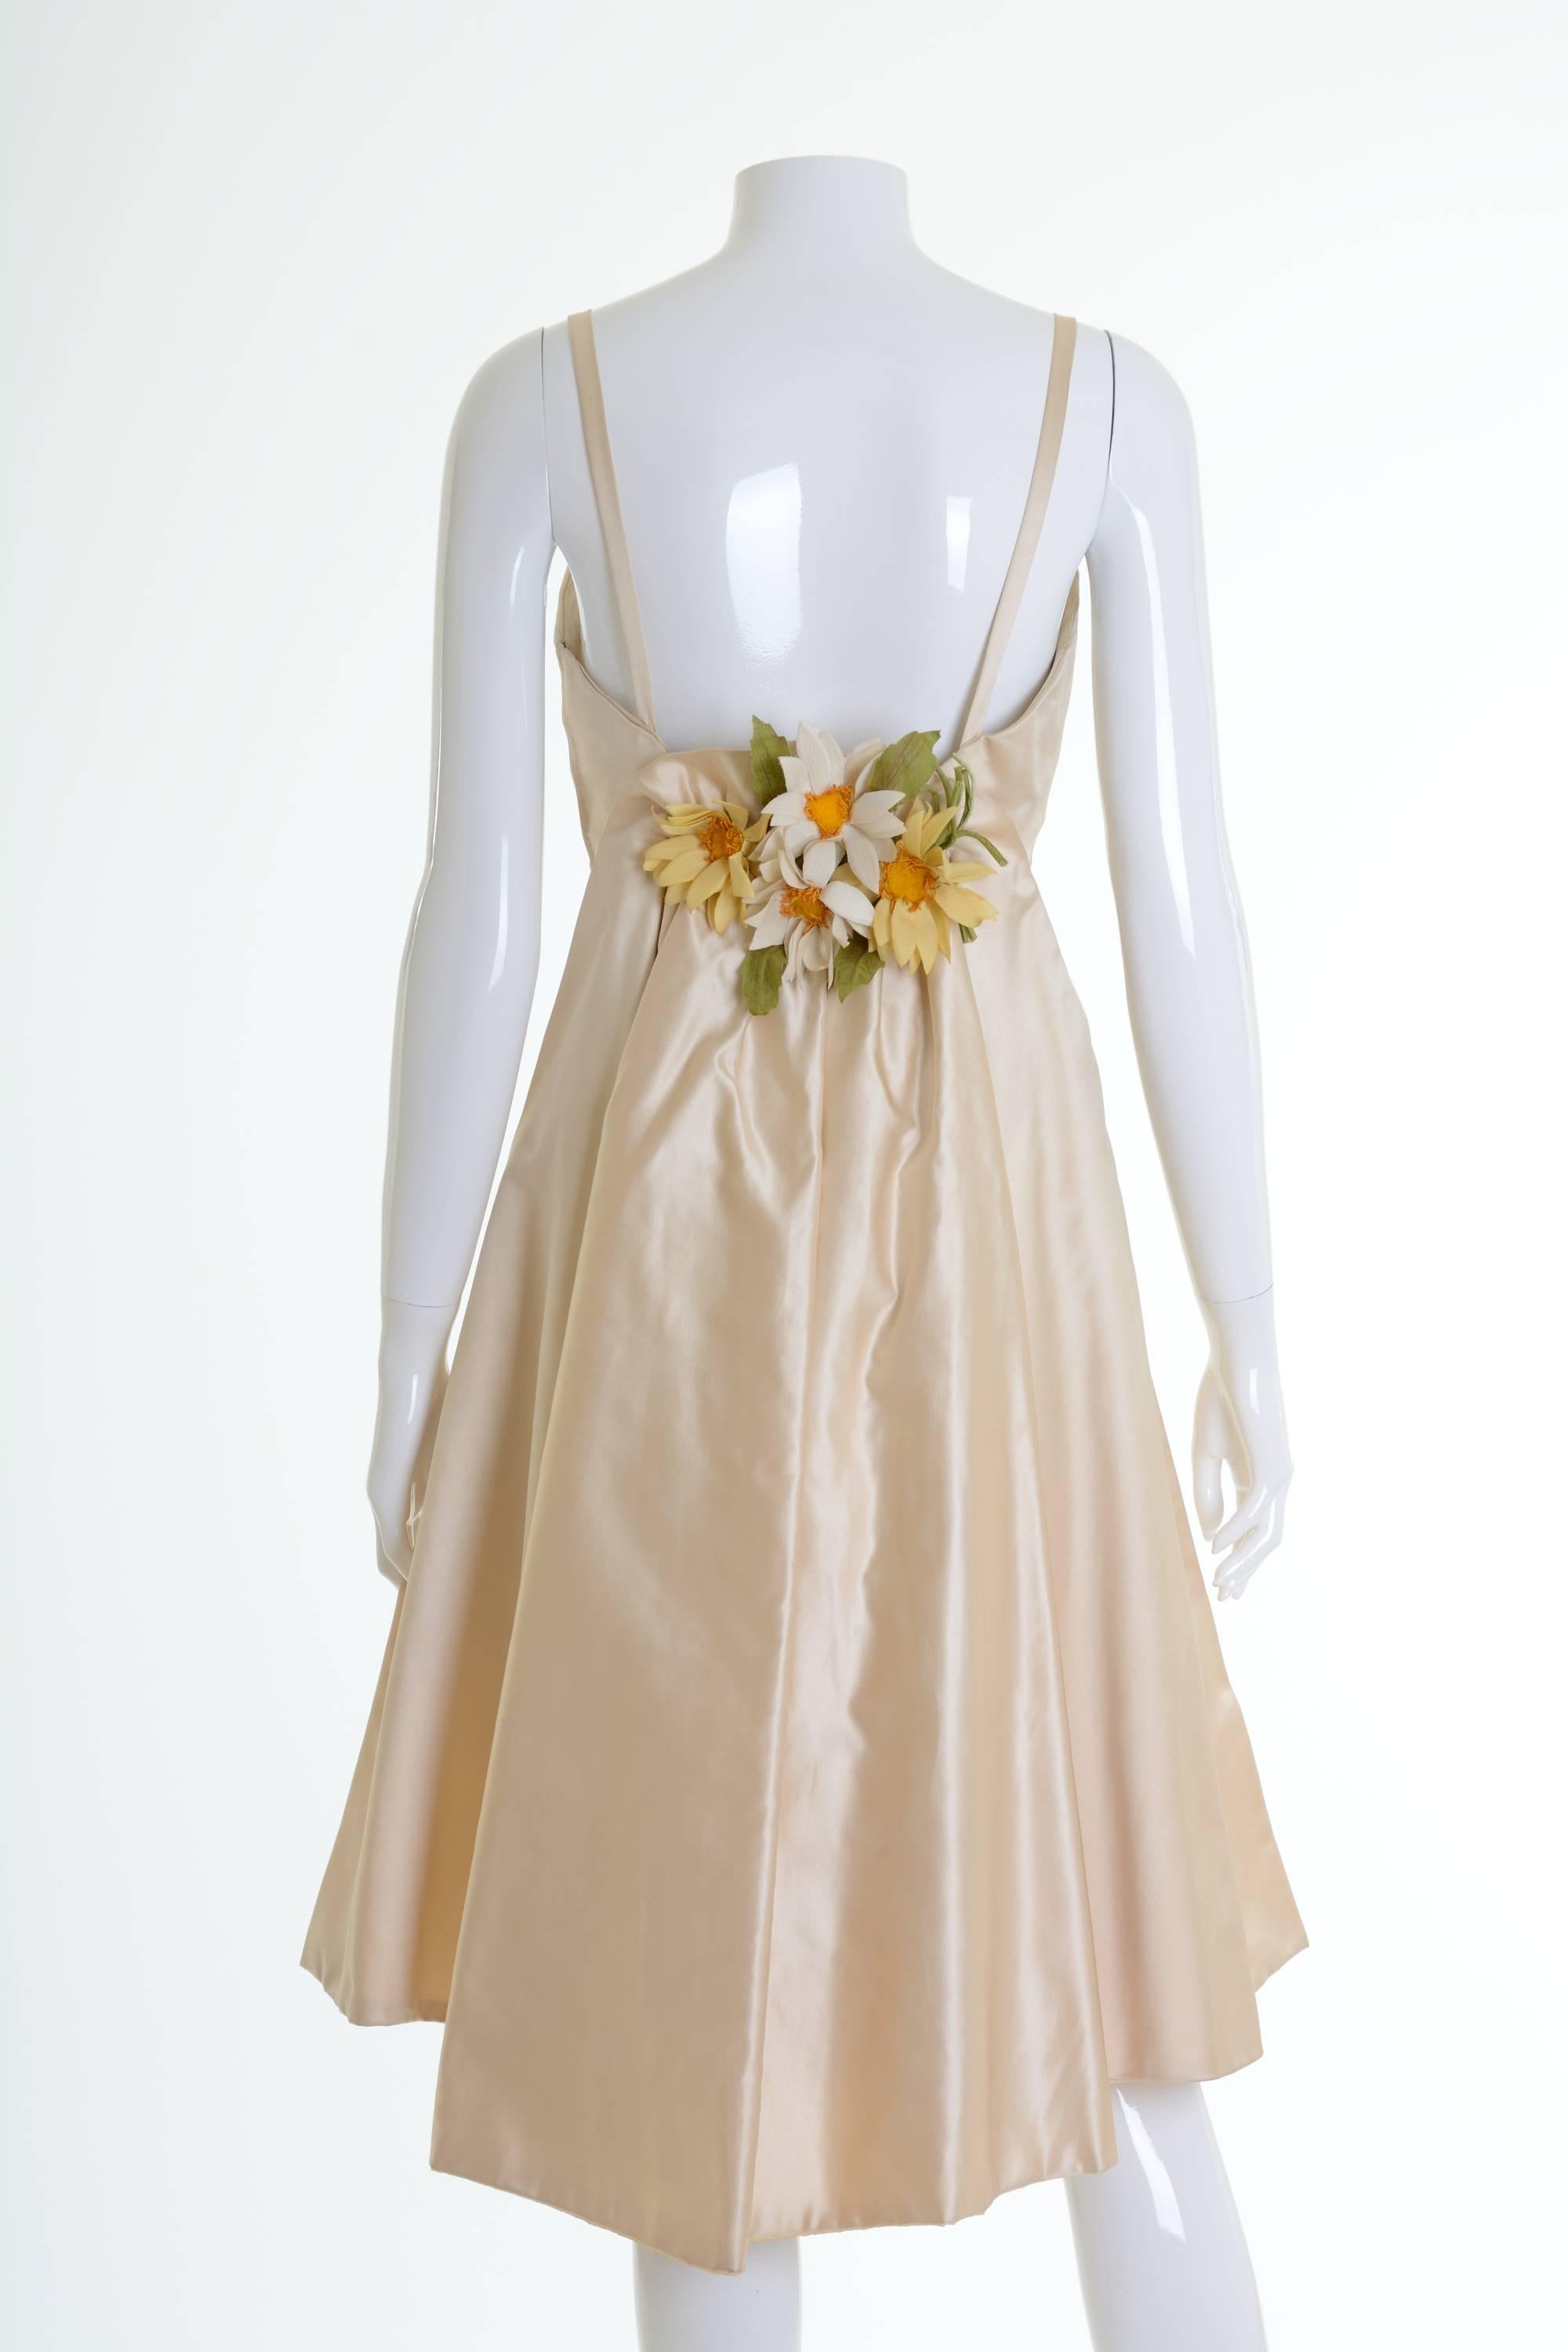 This amazing 1950s cocktail dress is in a cream silk taffeta fabric with lovely flowers on the back. It has boning corset, spaghetti straps, pleateds skirt and side zip closure. 

Good vintage condition
 
Label: N/A
Fabric: silk taffeta
Color: